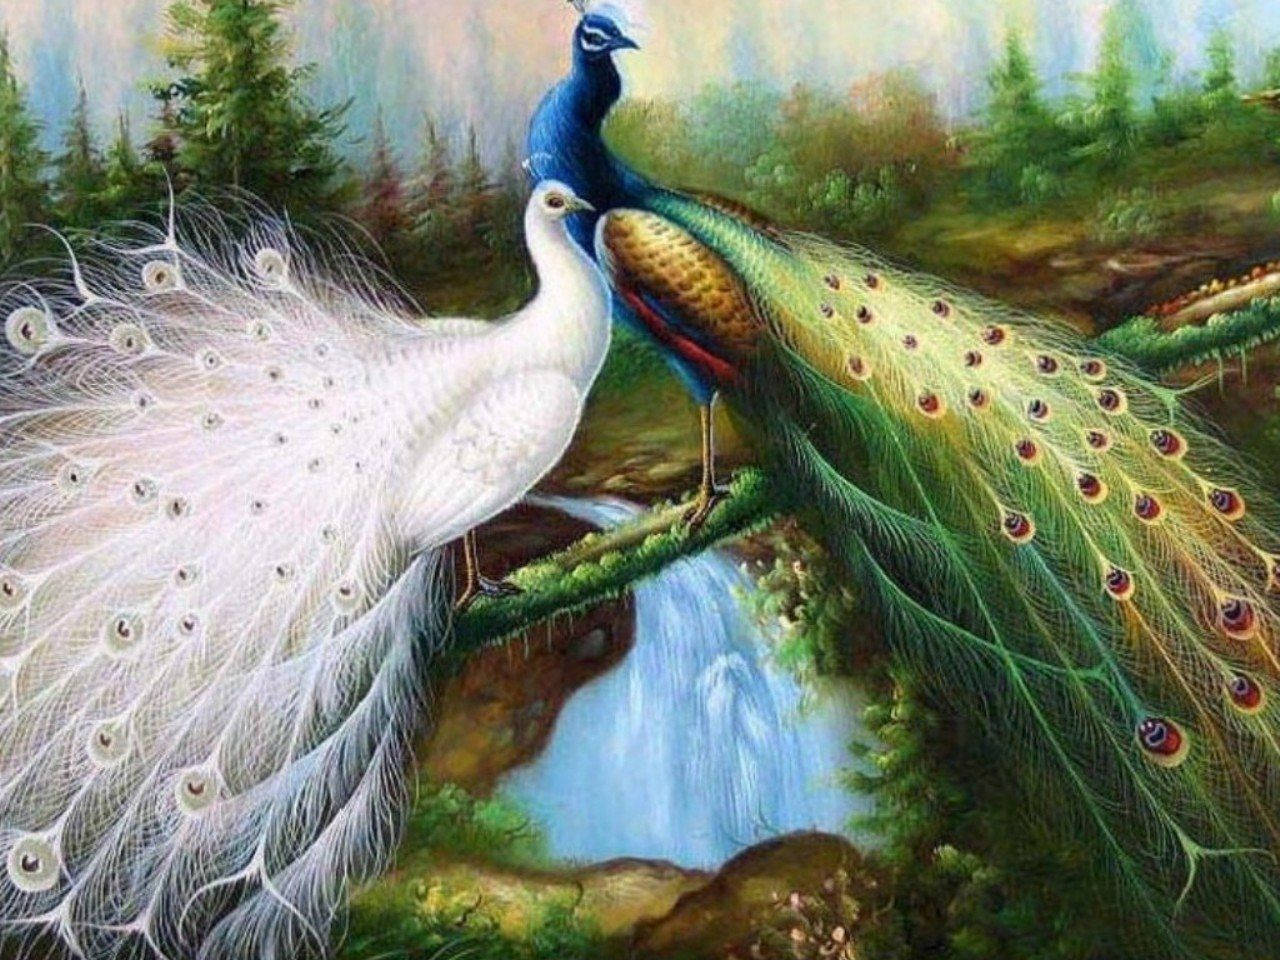 White And Blue-Green Peacock Painting Wallpaper